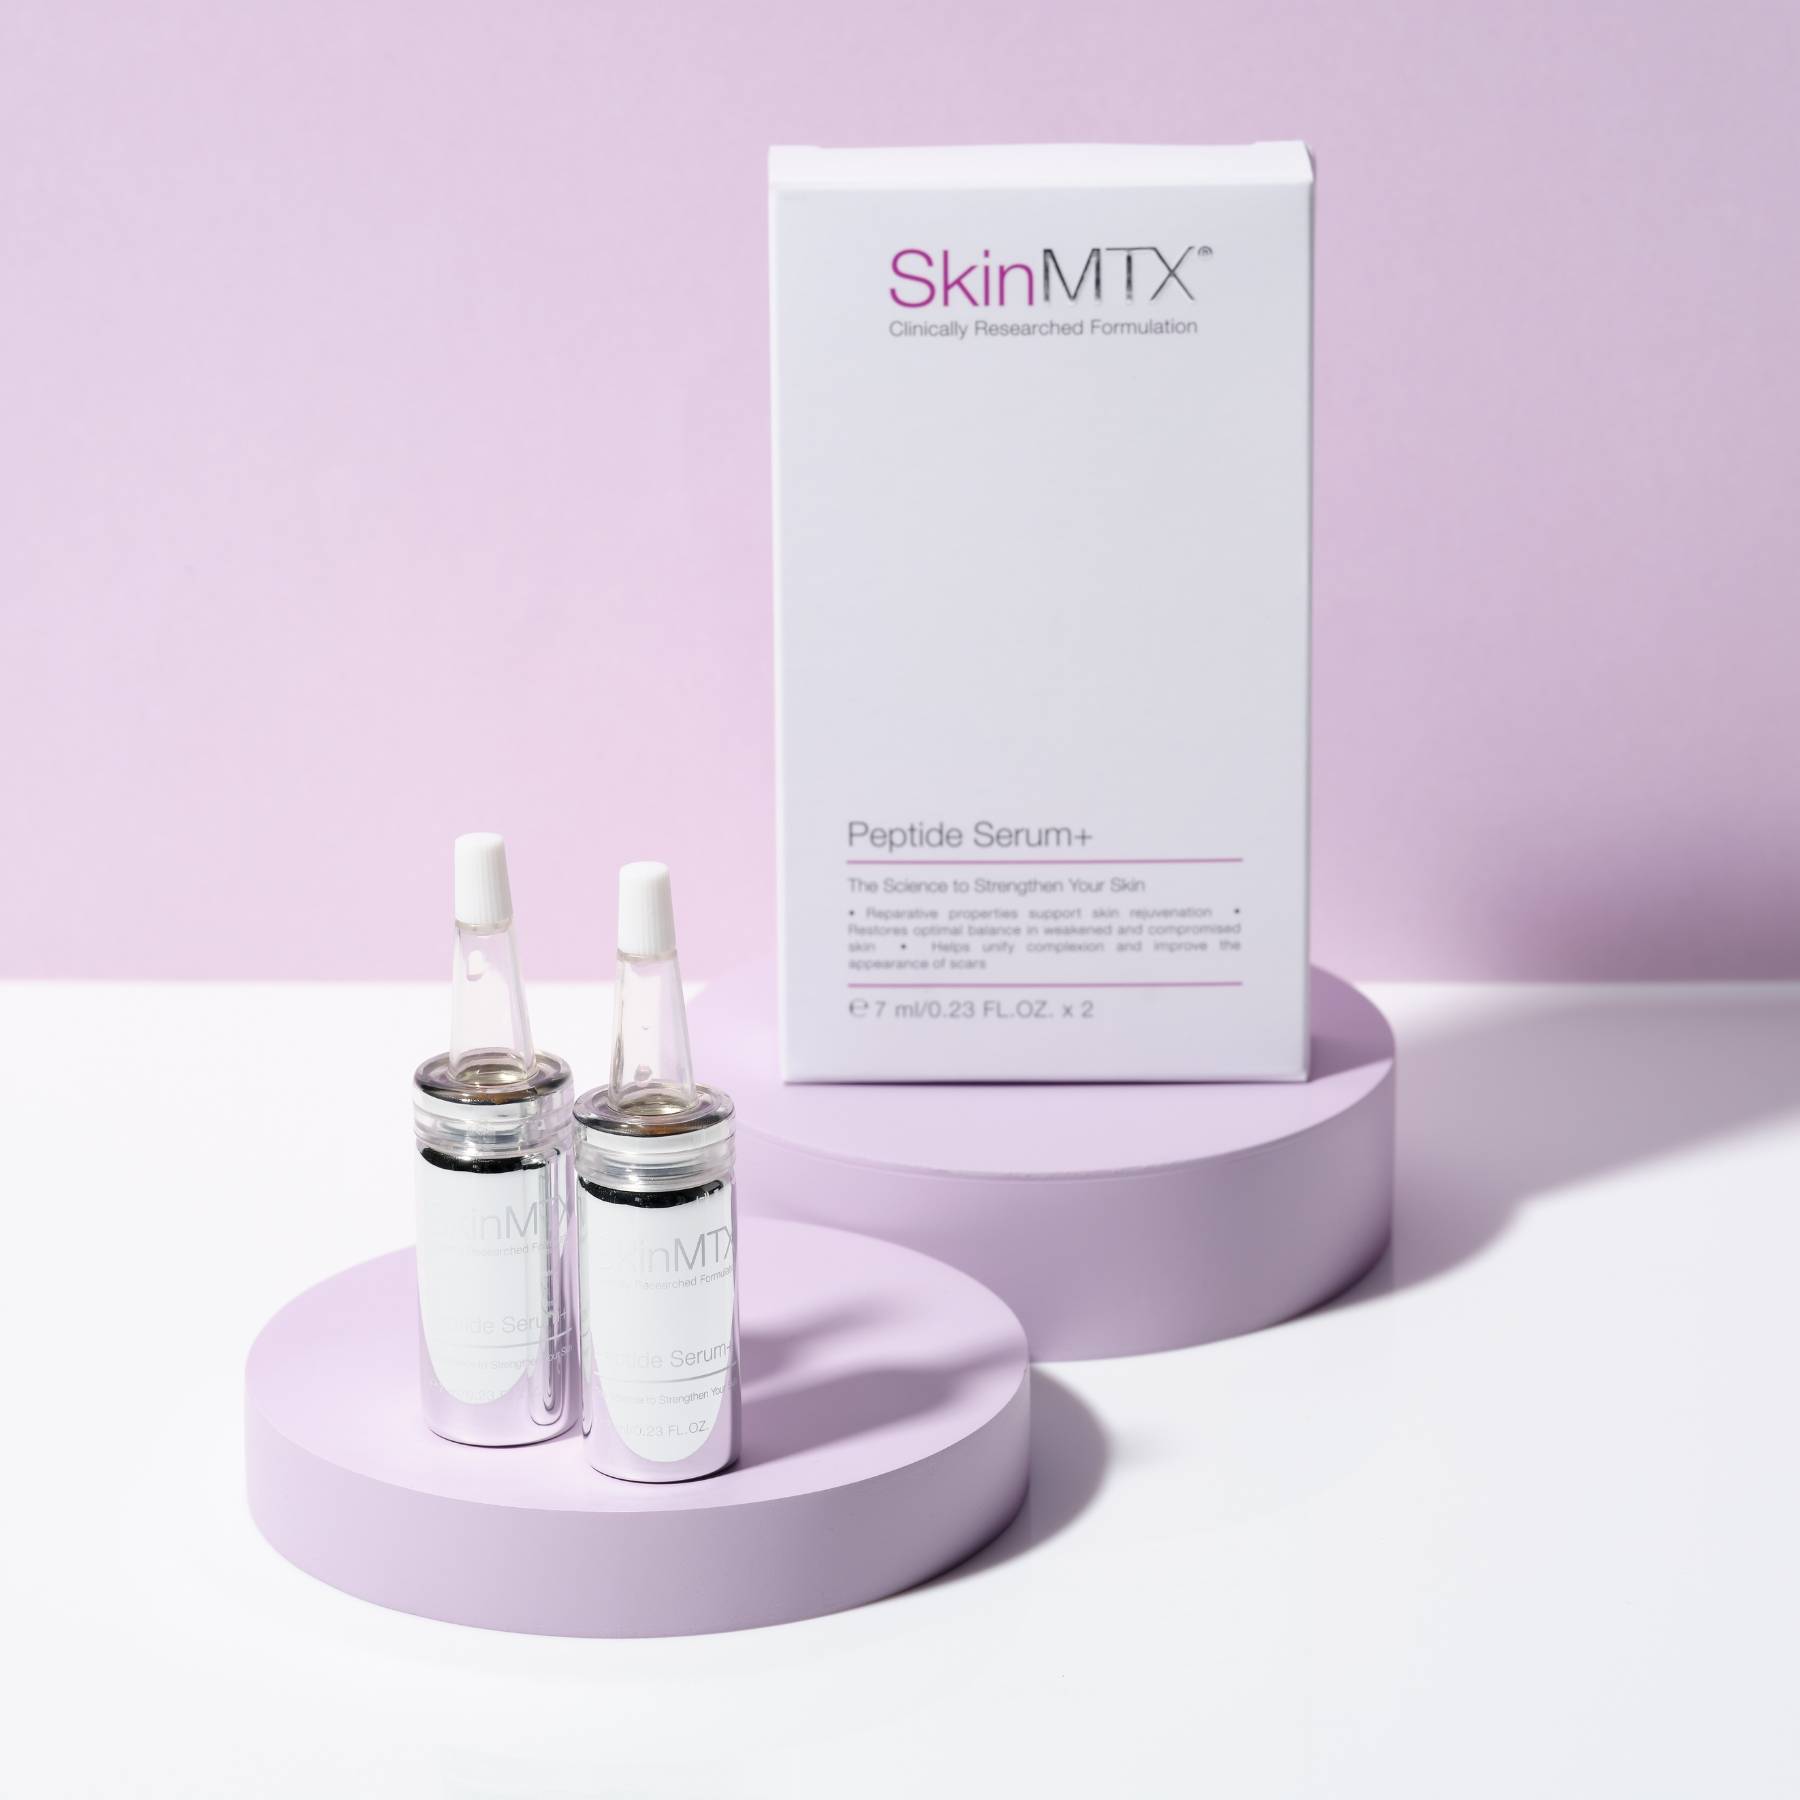 Skin MTX products